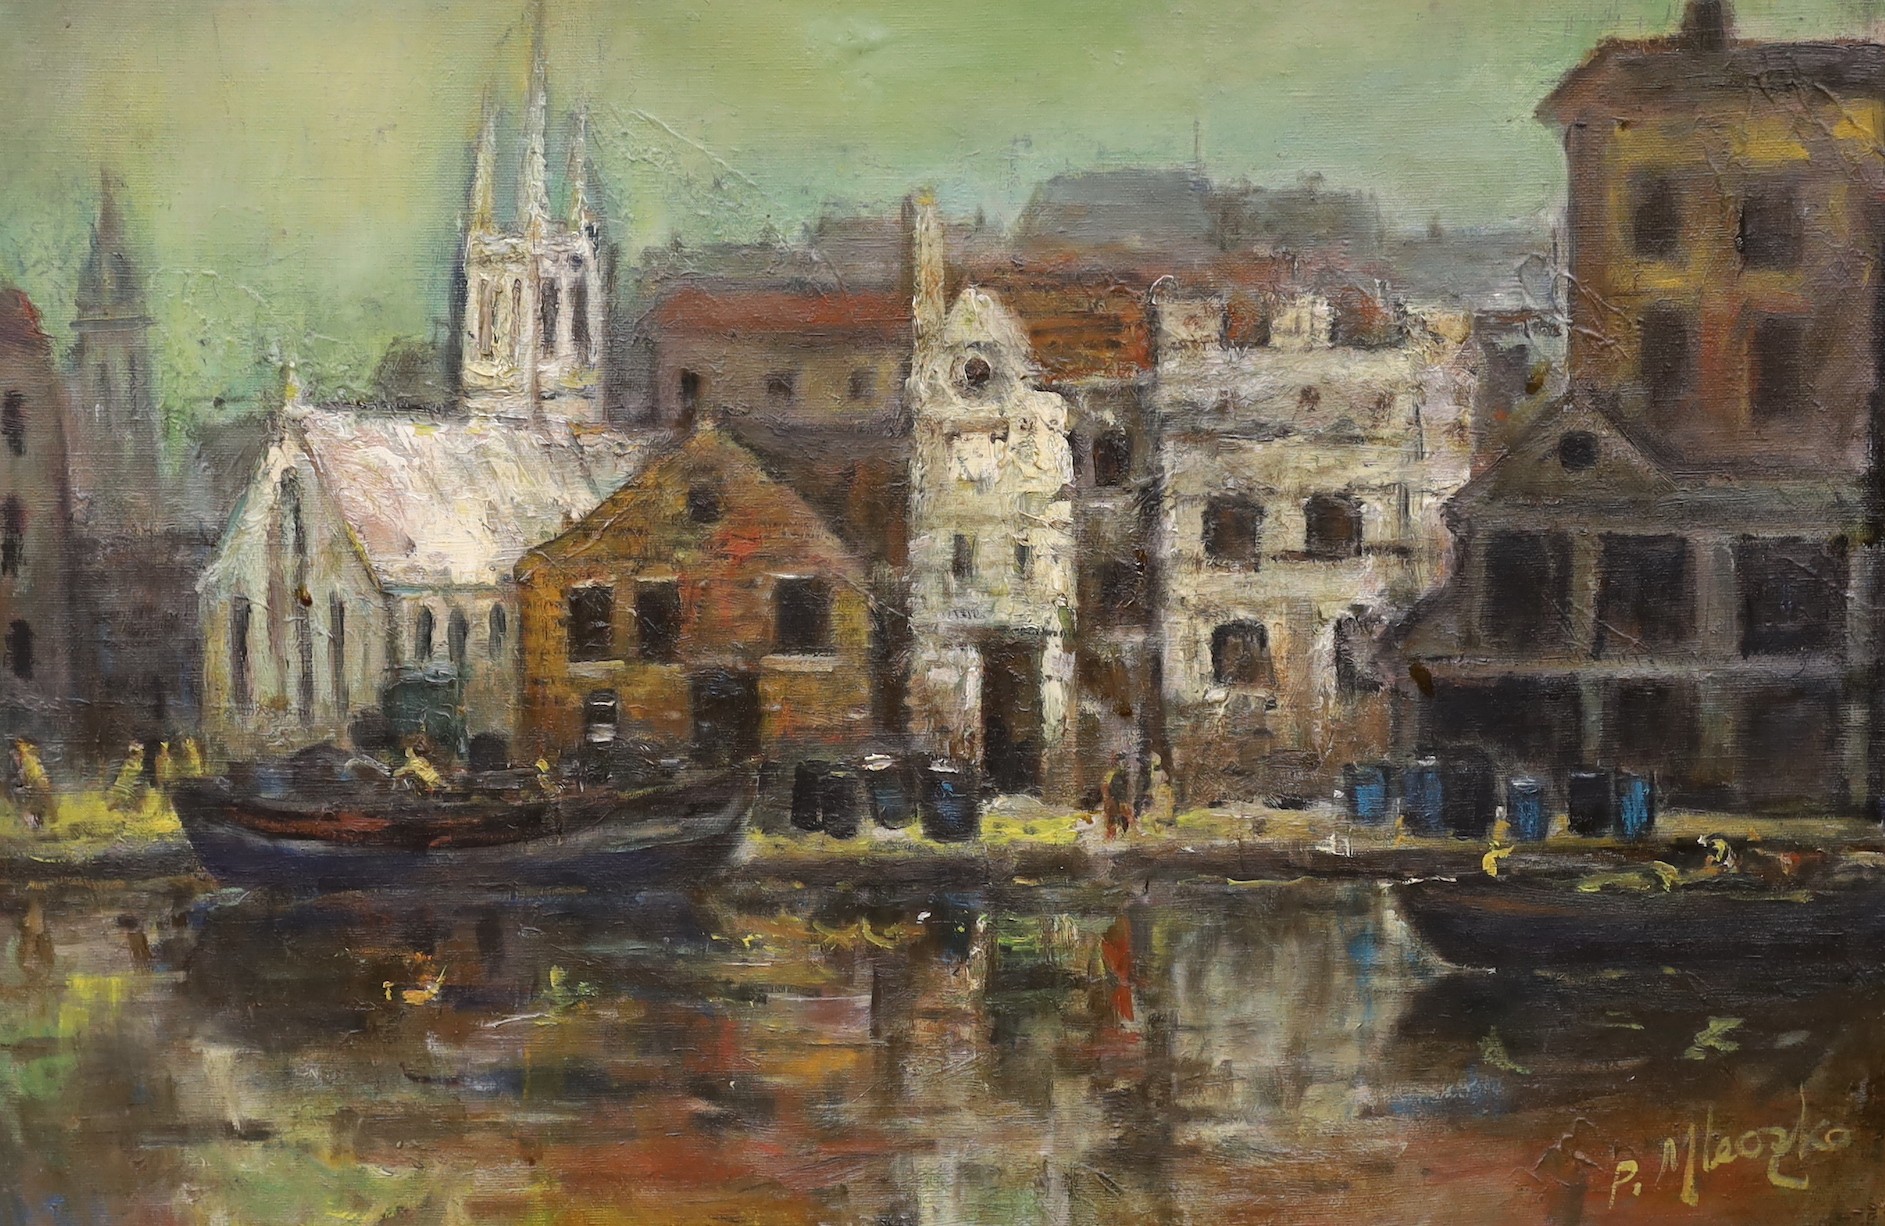 Piotr Mleczko (Polish, 1919-95), oil on canvas, 'River Thames near Hammersmith Bridge' and Untitled abstracted figures, both signed, 39 x 58cm and 60 x 45cm